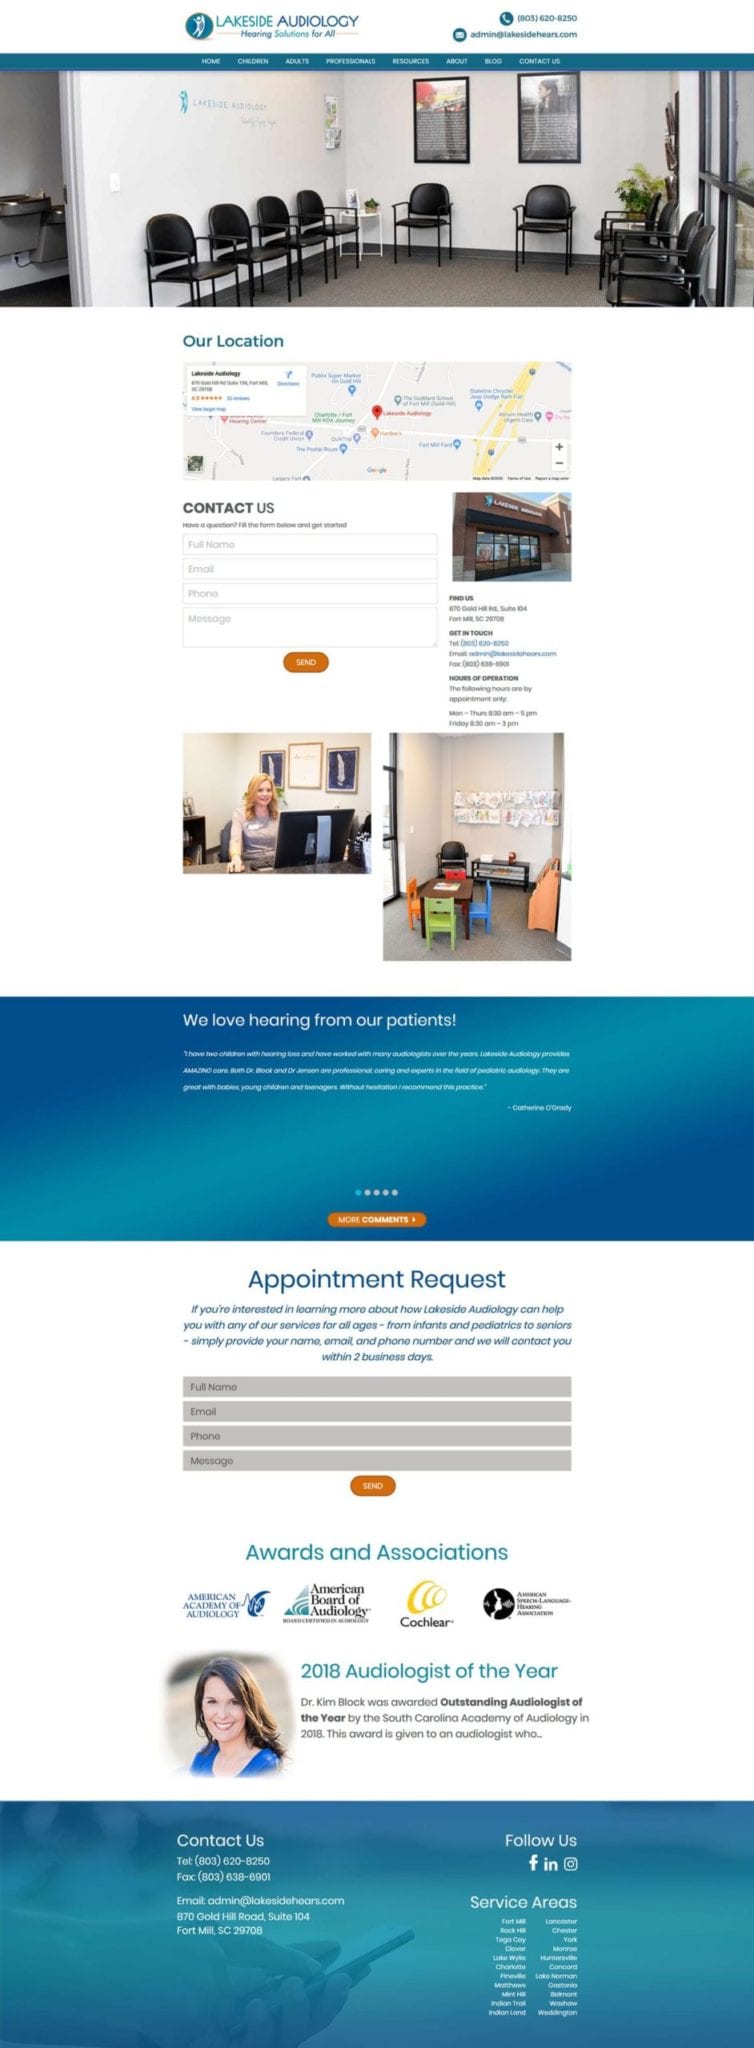 Lakeside Audiology website contact page screenshot